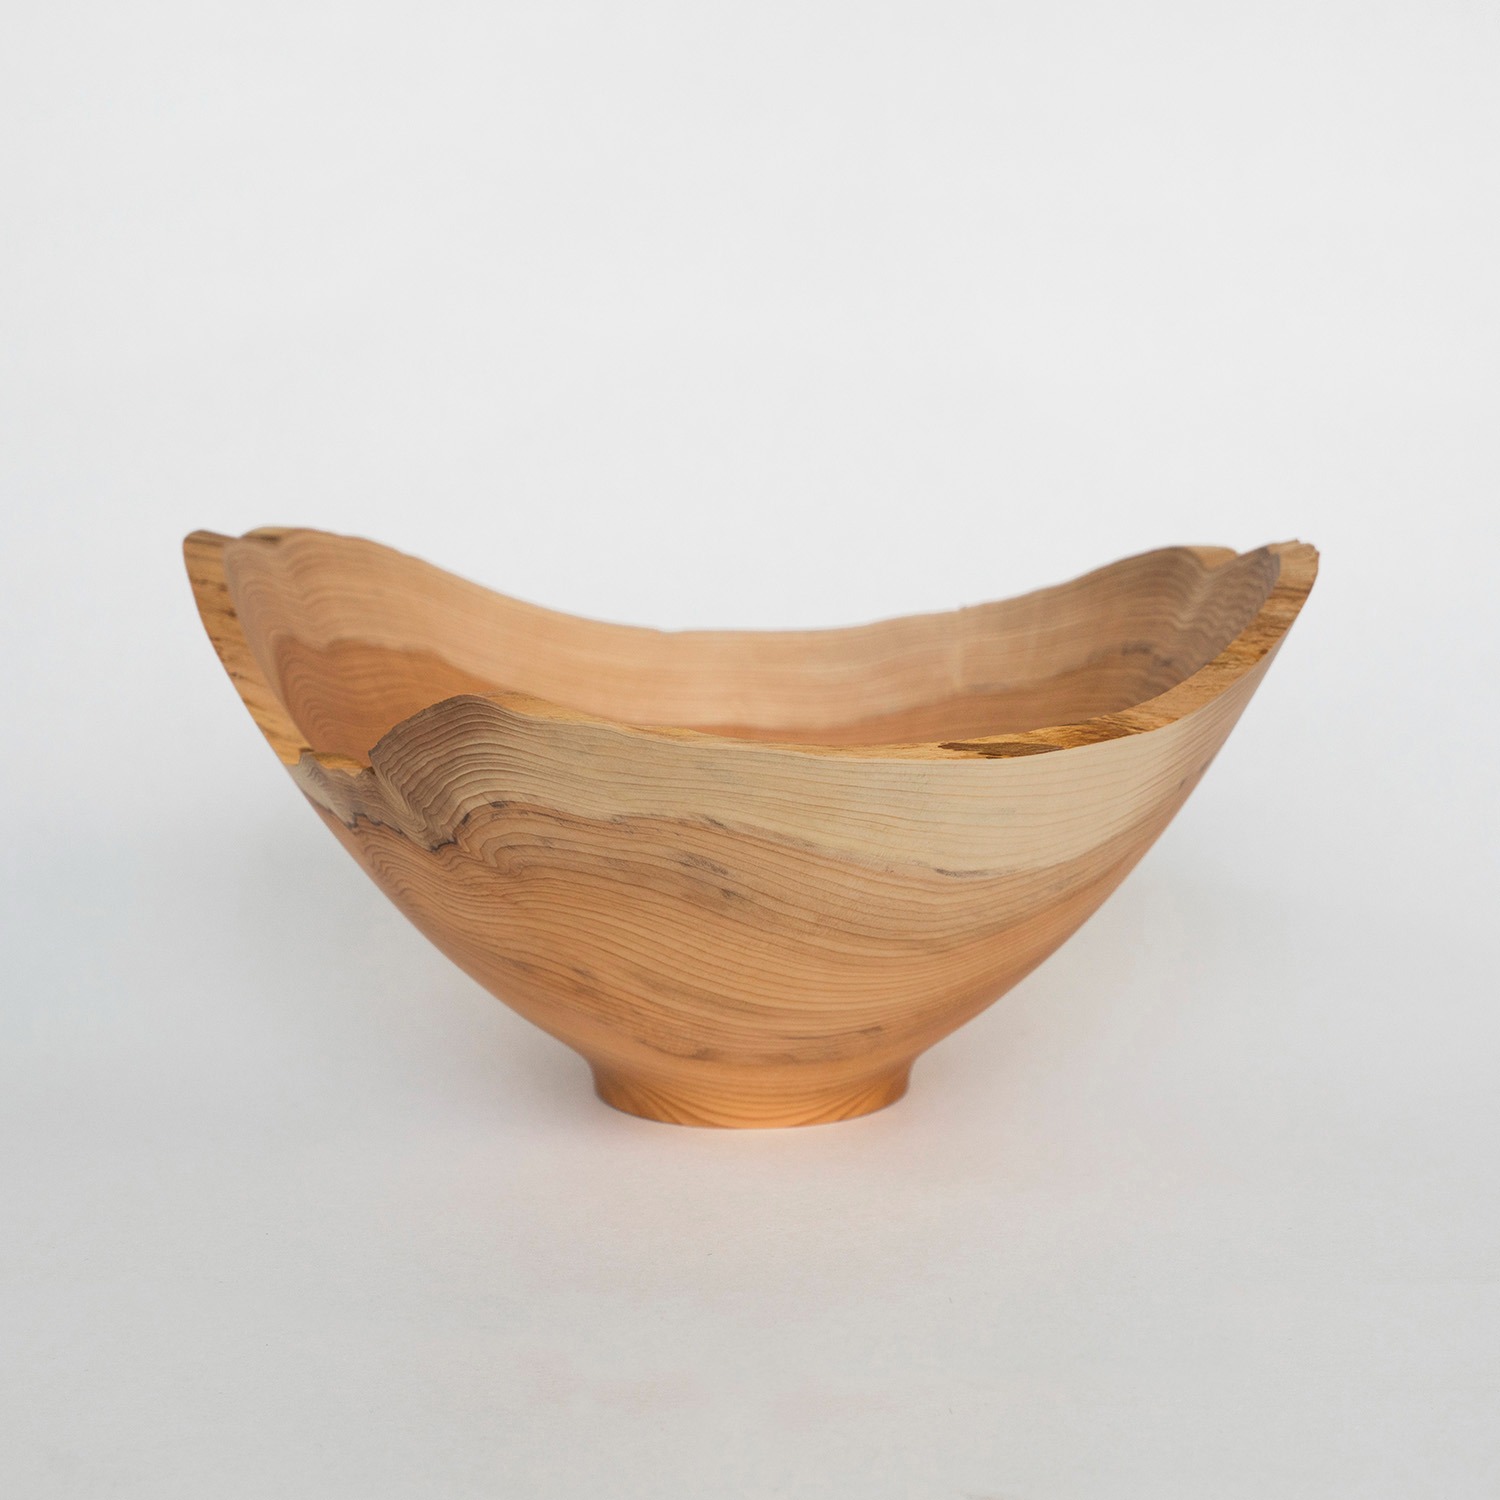 Hand-turned Wooden Bowls - Group A